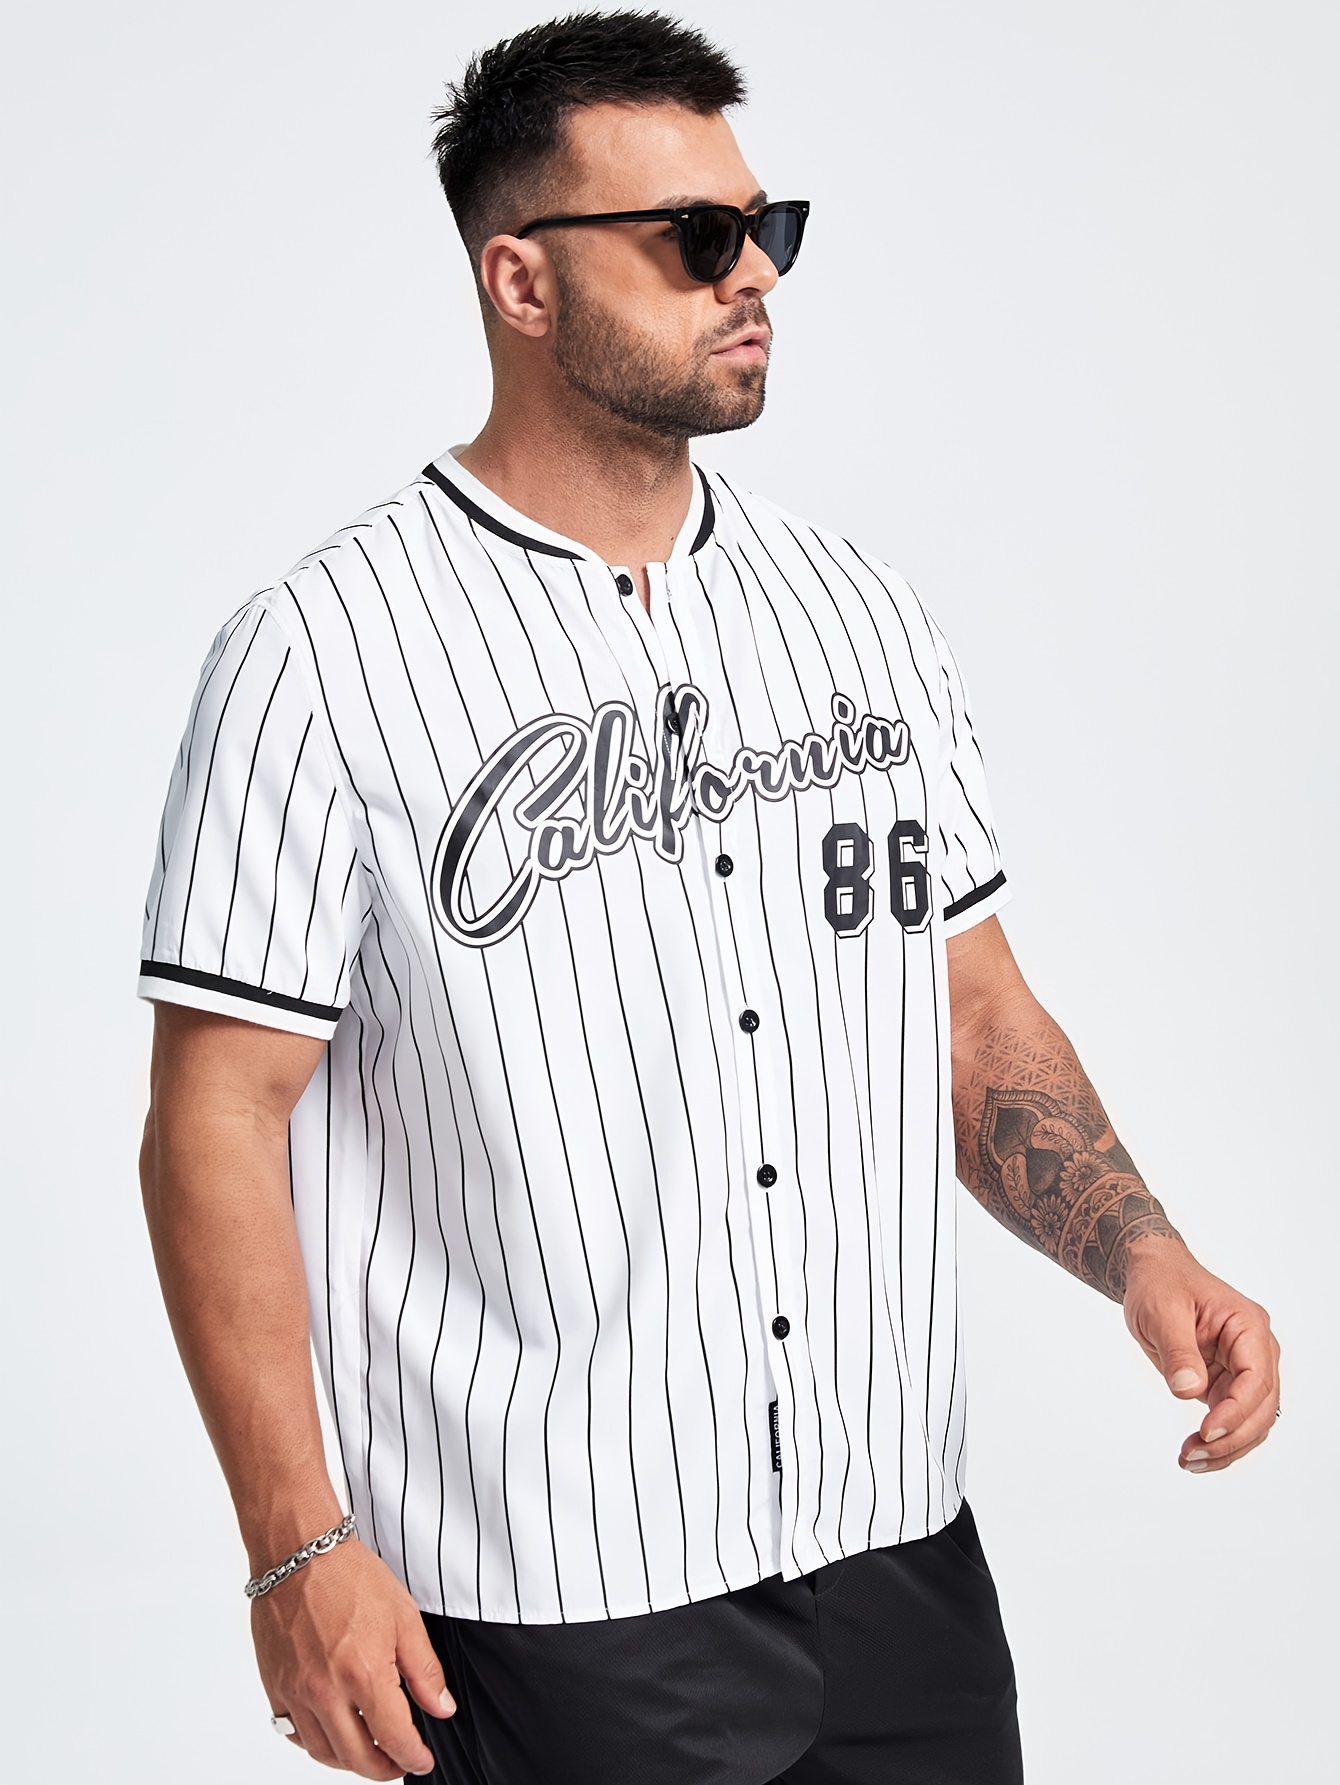 Plus Size Men's Striped Short Sleeve Band Collar Jersey For Baseball,  California Graphic Print Baseball Shirt For Big & Tall Males, Men's  Clothing